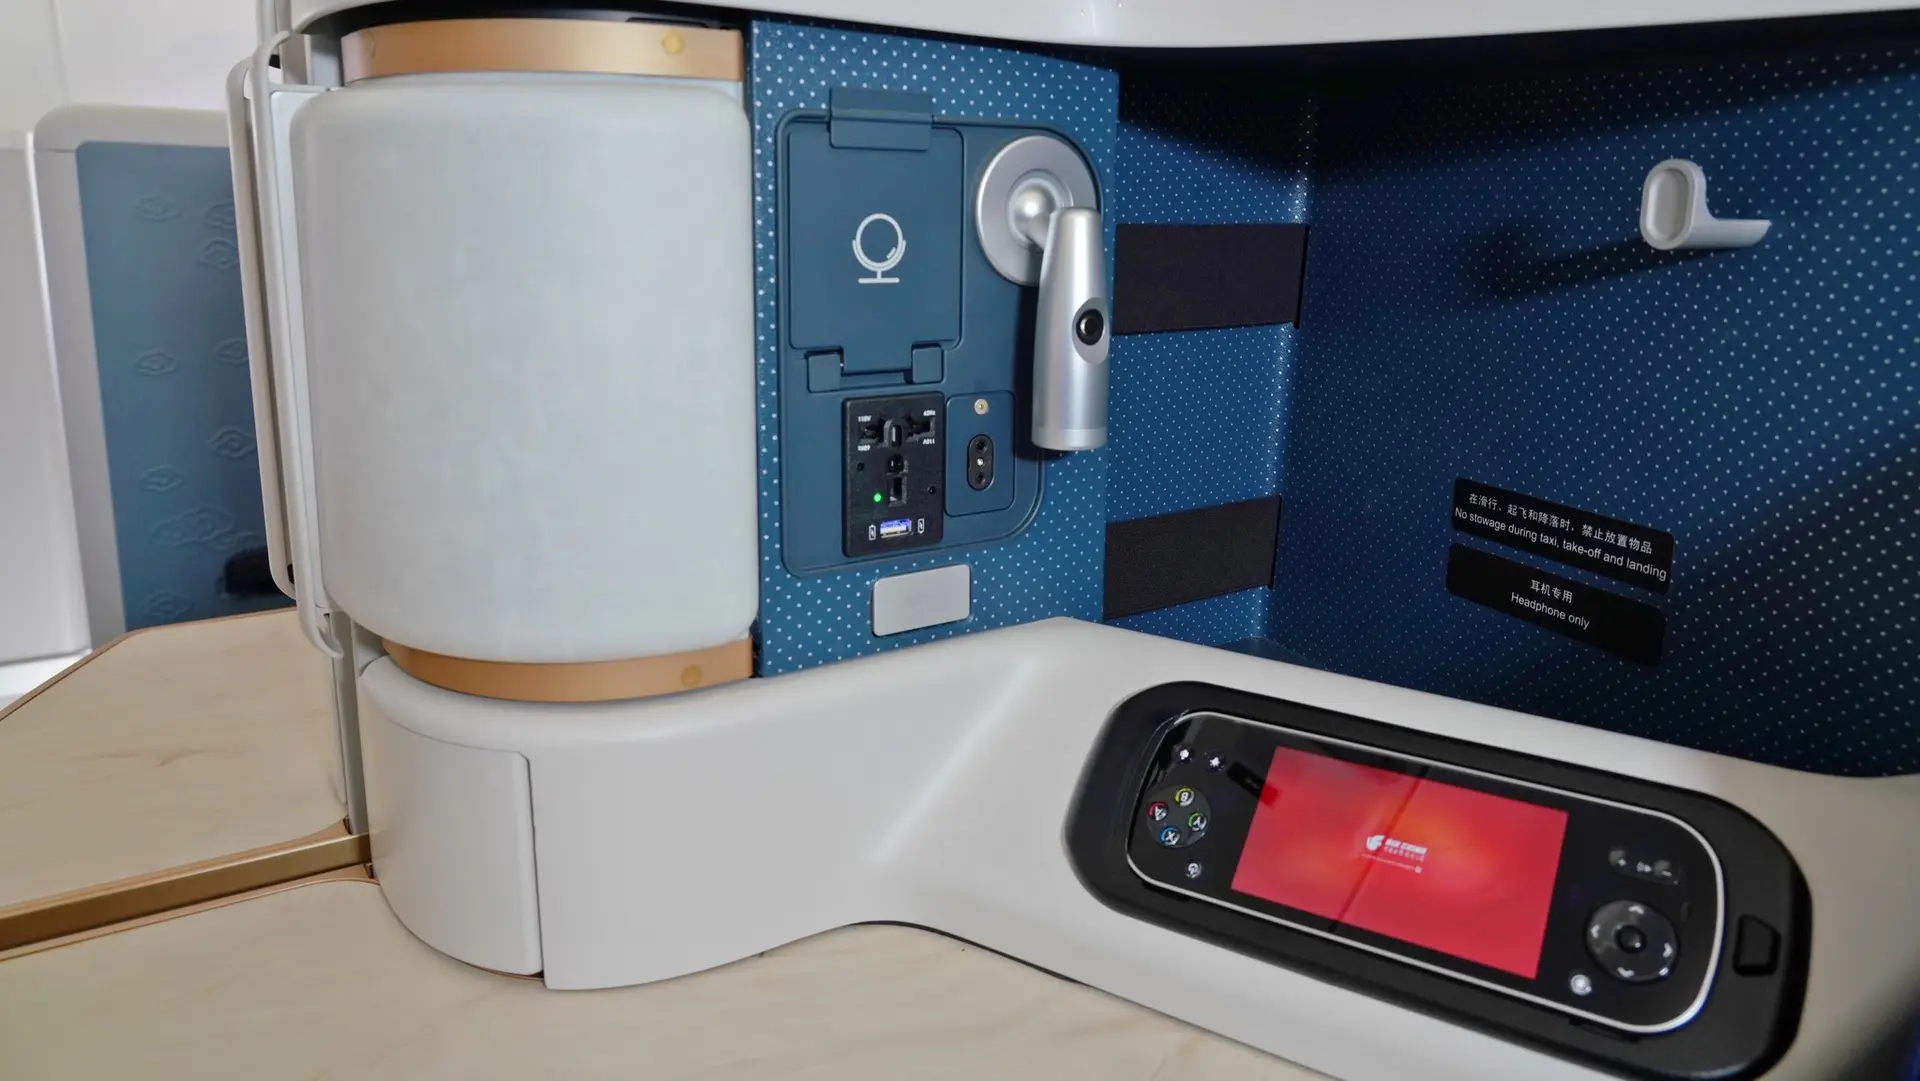 Airlines News - Air China unveils A350 Business Class "mini-suite"